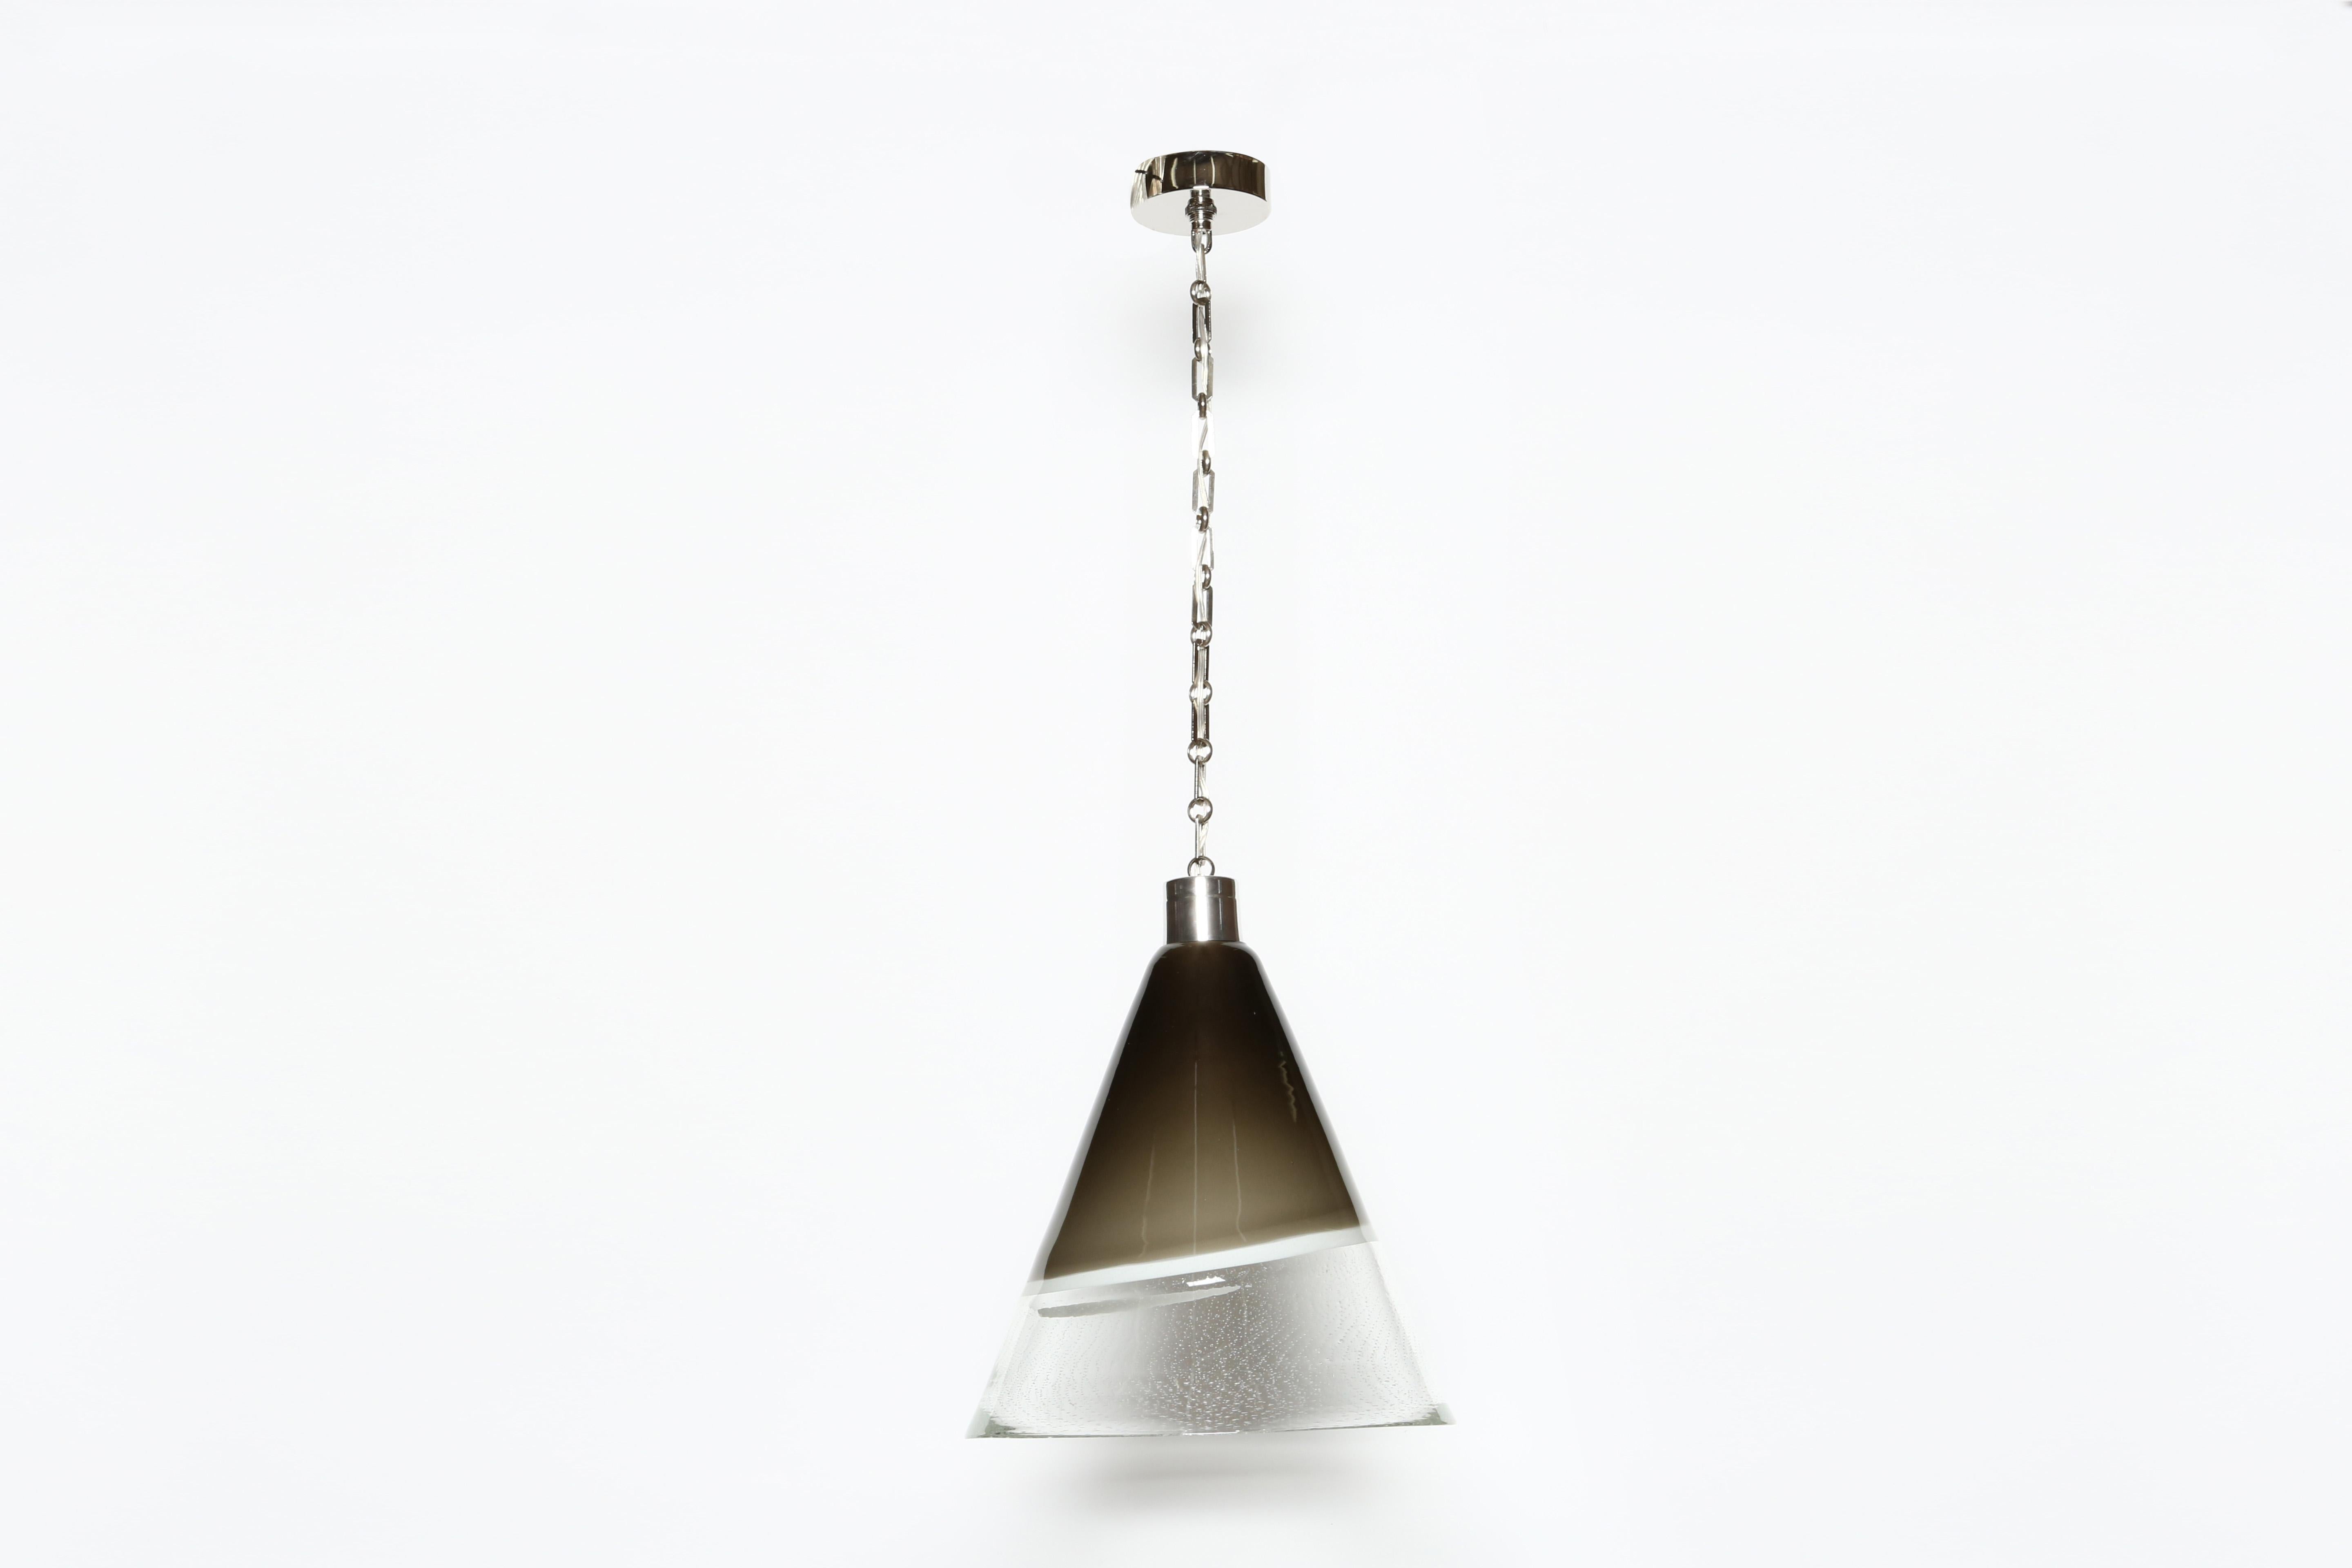 Murano glass ceiling pendant by Fratelli Toso for Leucos.
Murano glass, nickel plated deco chain.
Designed and made in Italy, 1970s.
Rewired for US.

We take pride in bringing vintage fixtures to their full glory again.
At Illustris Lighting our